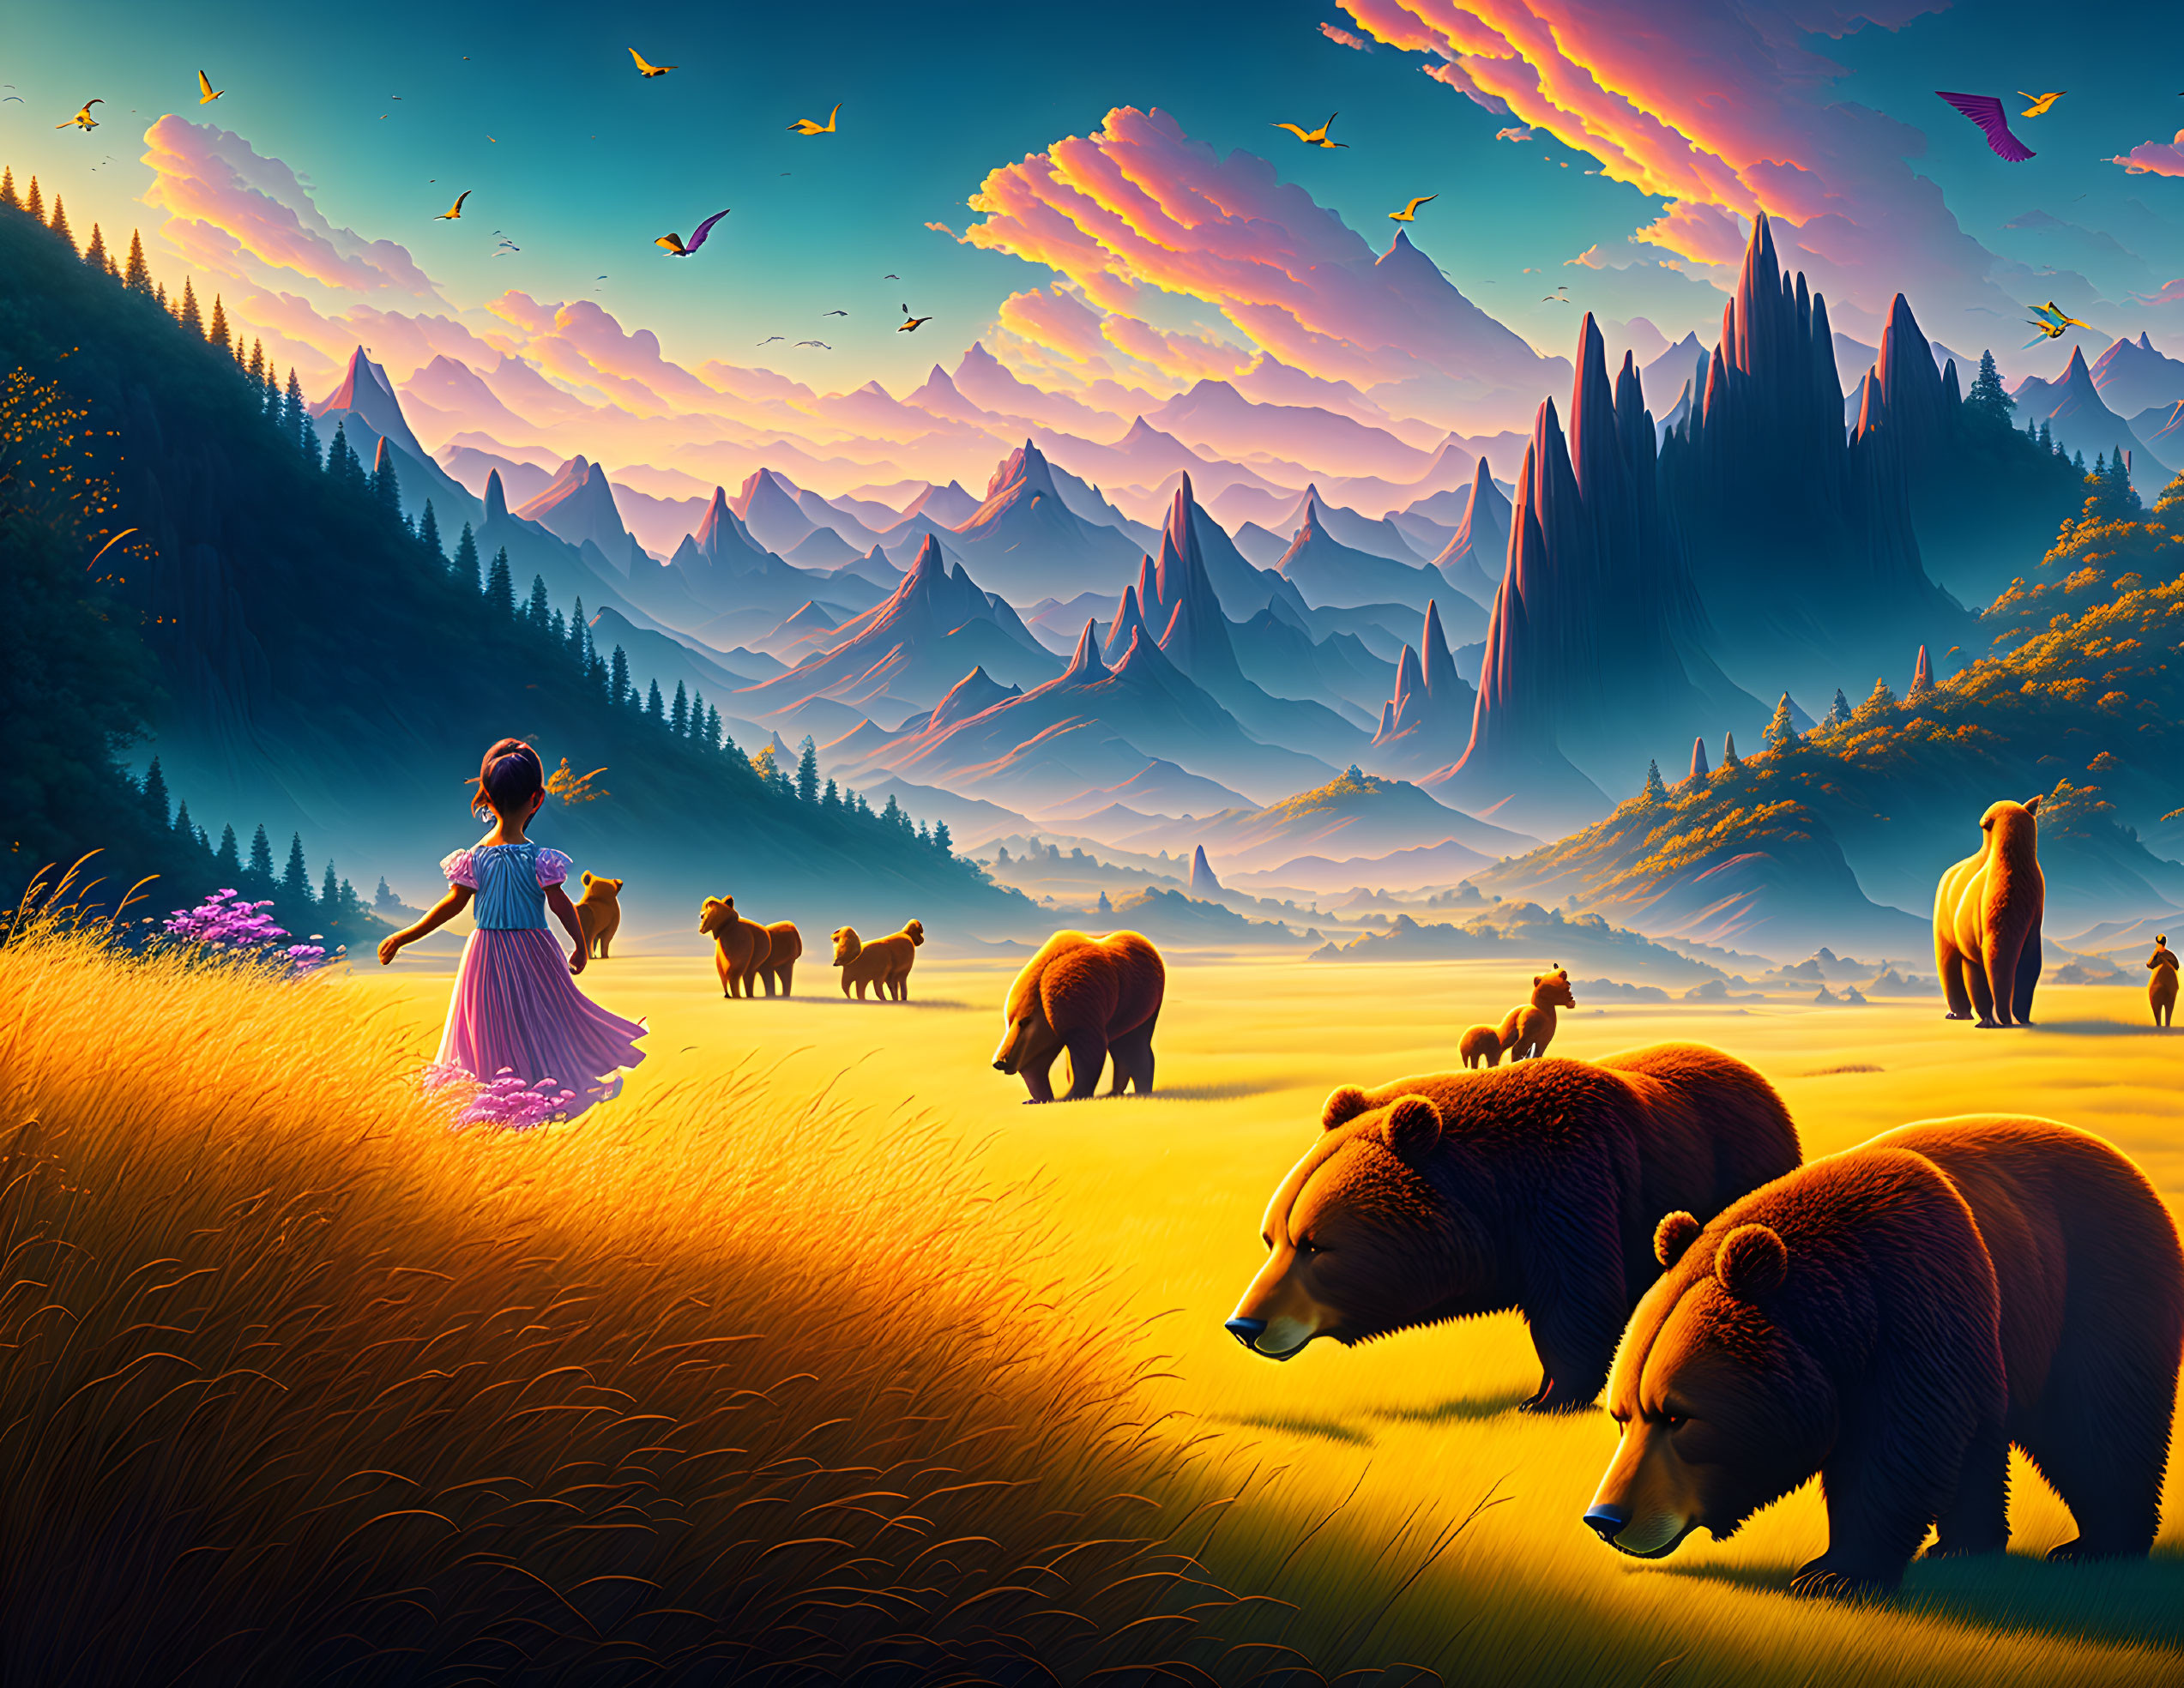 a little girl in a meadow eyed by a giant bear